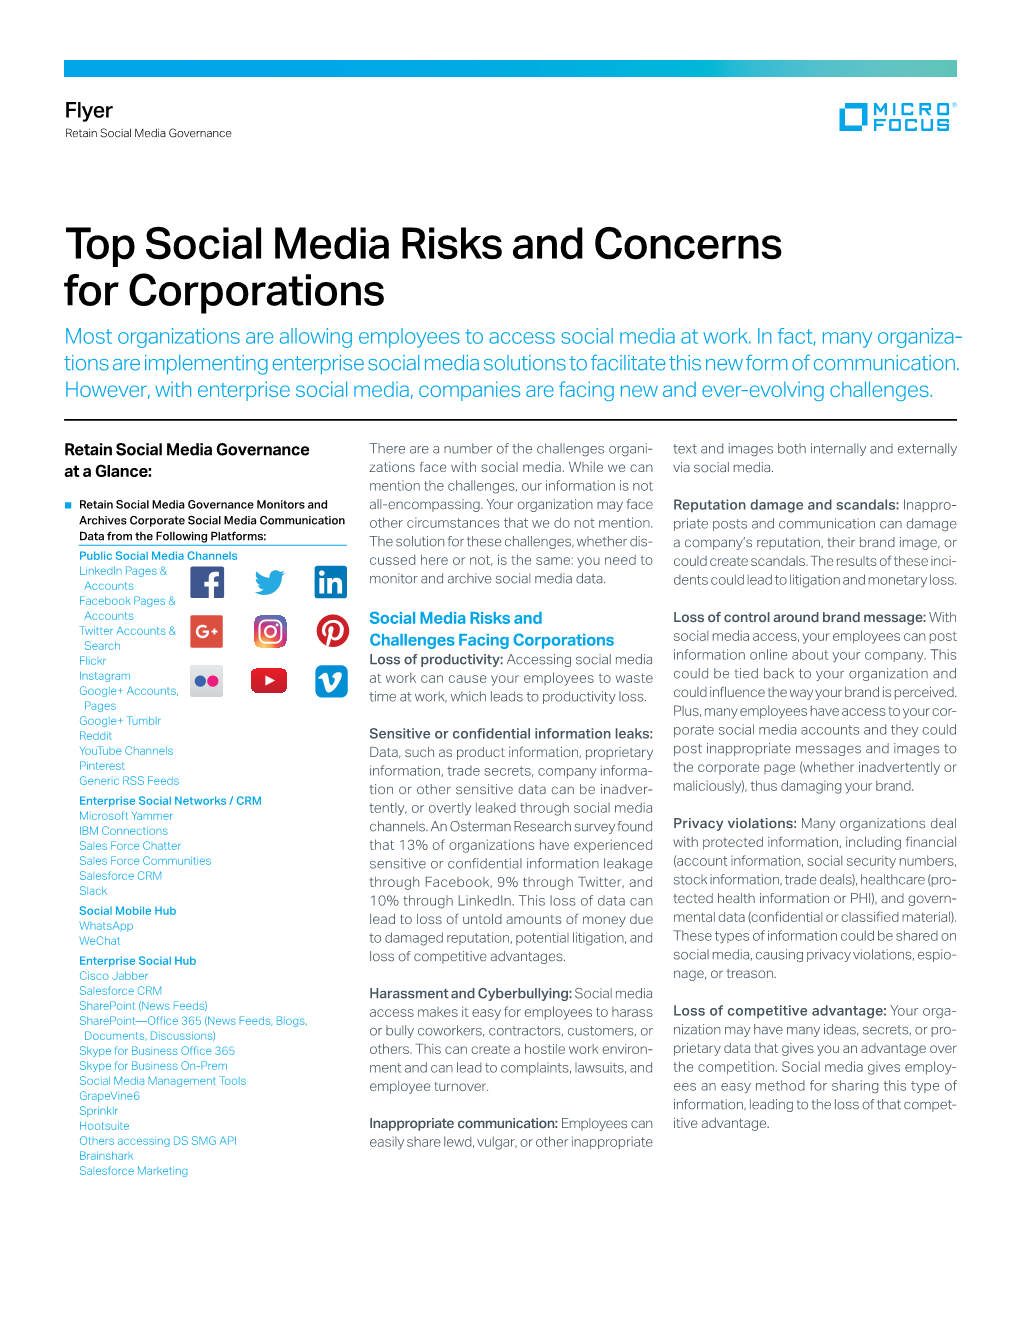 Top Social Media Risks and Concerns for Corporations Most Organizations Are Allowing Employees to Access Social Media at Work